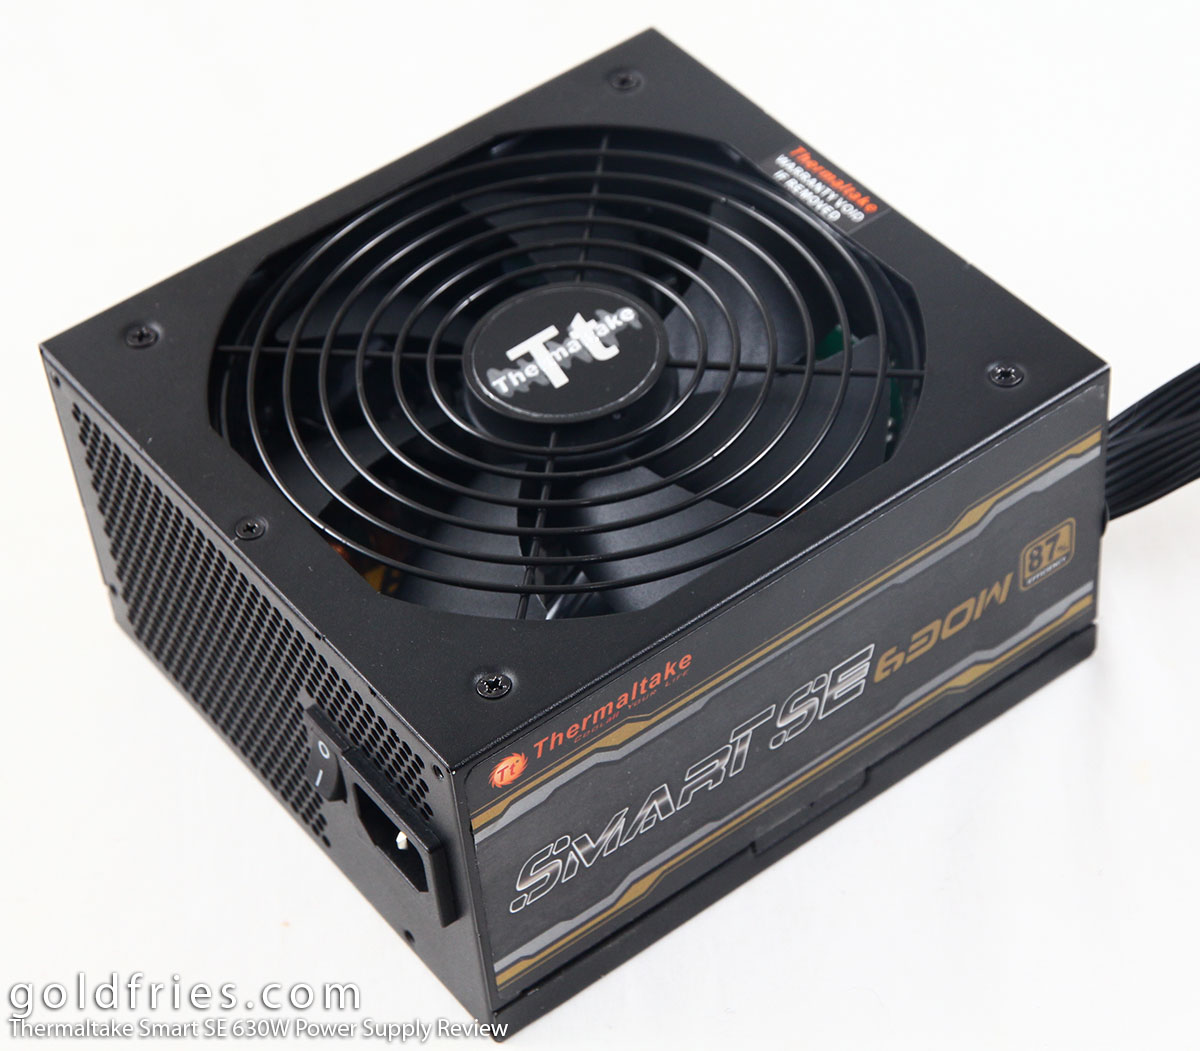 Thermaltake Smart SE 630W Power Supply Review